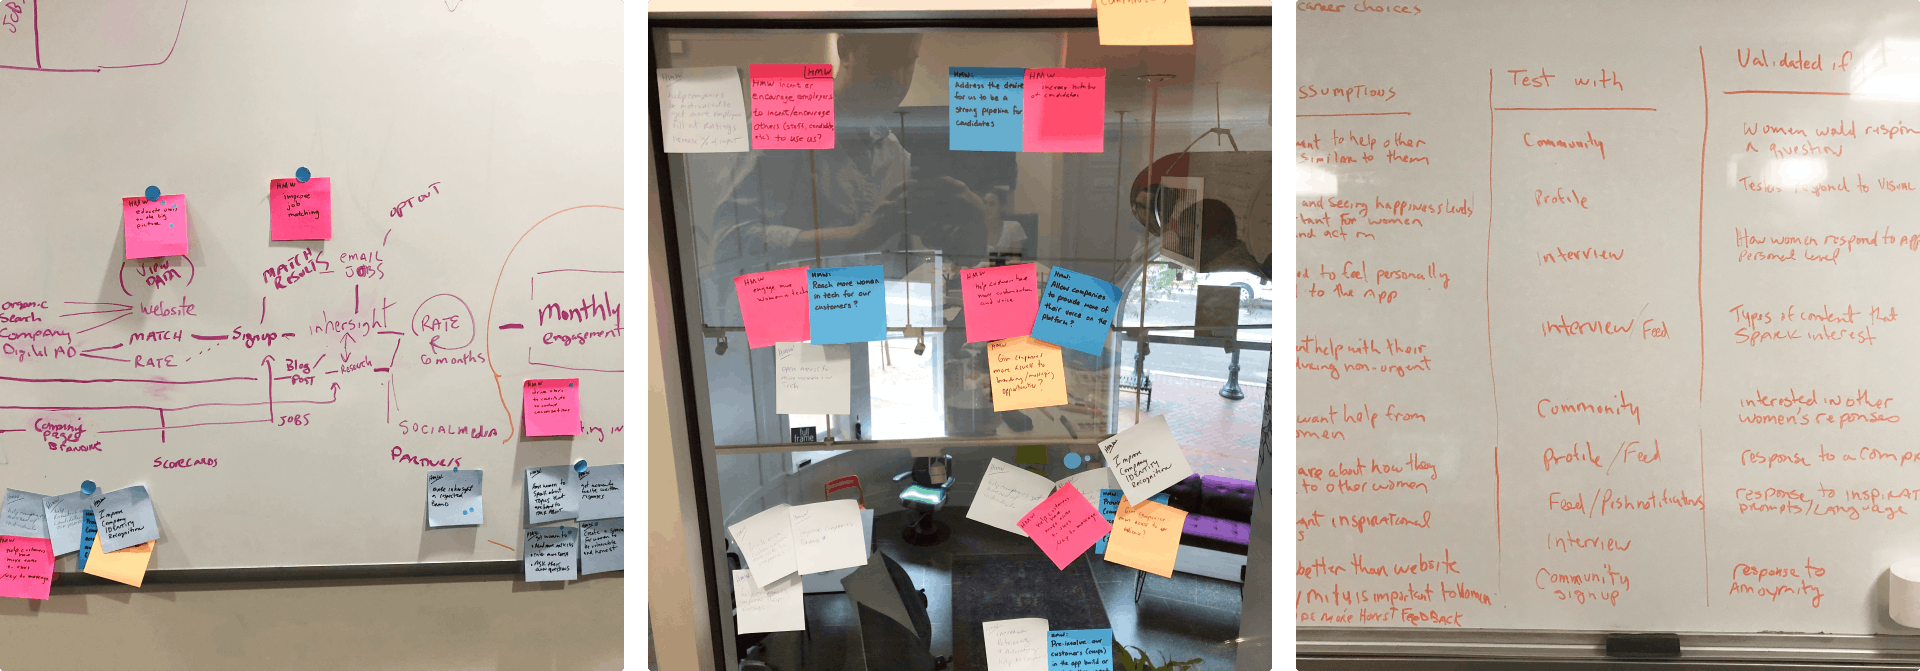 Three images of the InHerSight design sprint; a critical path journey on  a whiteboard, post-its gathered together from how might we exercise, an assumptions test table on the whiteboard